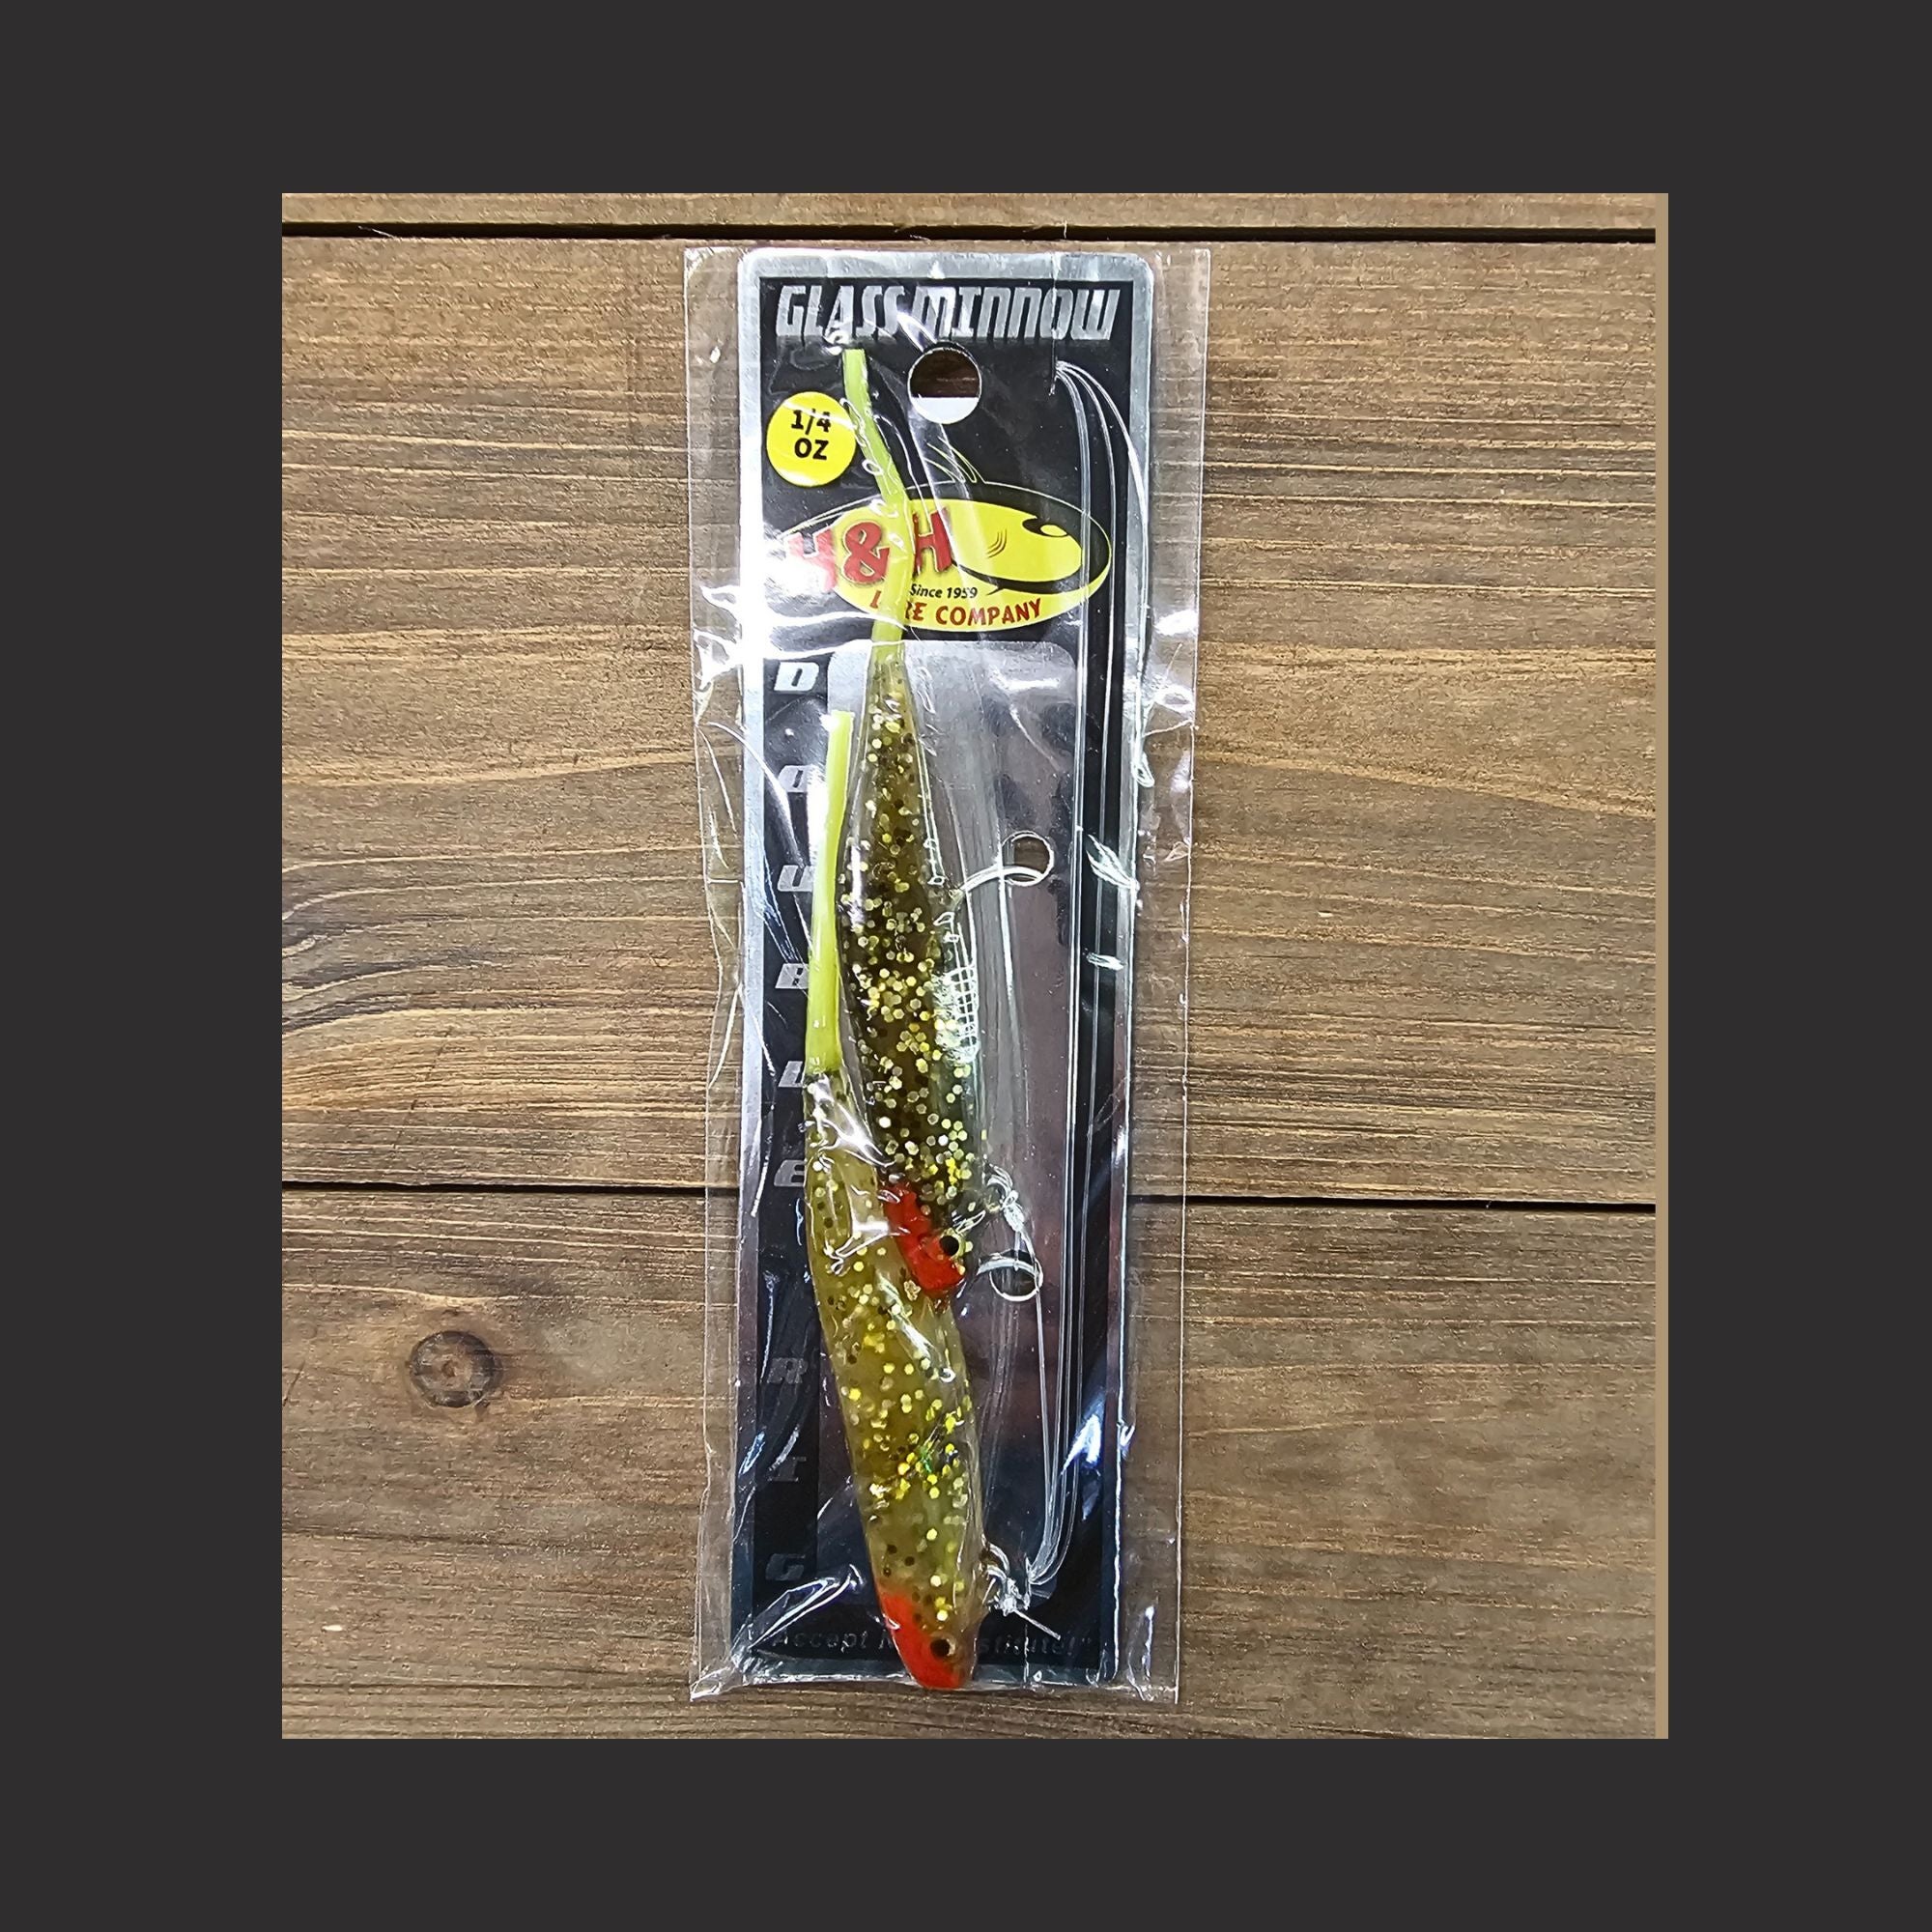 Glass Minnow Double Rig Fishing Lure, 1/4 oz